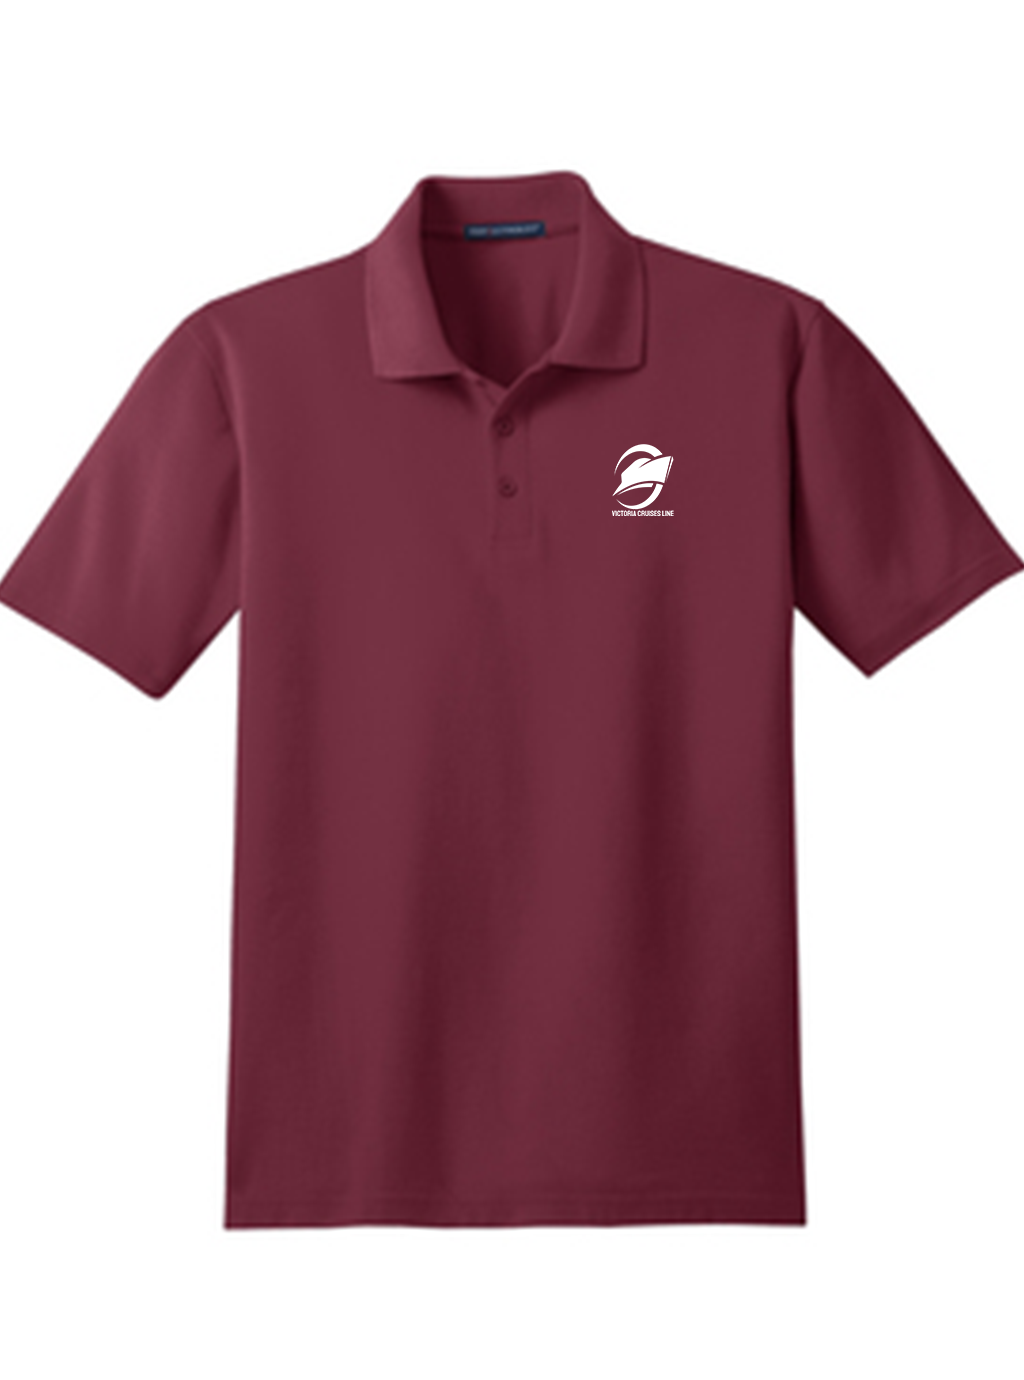 Men's Wicking Polo with UV Protection, Burgundy [Left Chest / VCL All White]